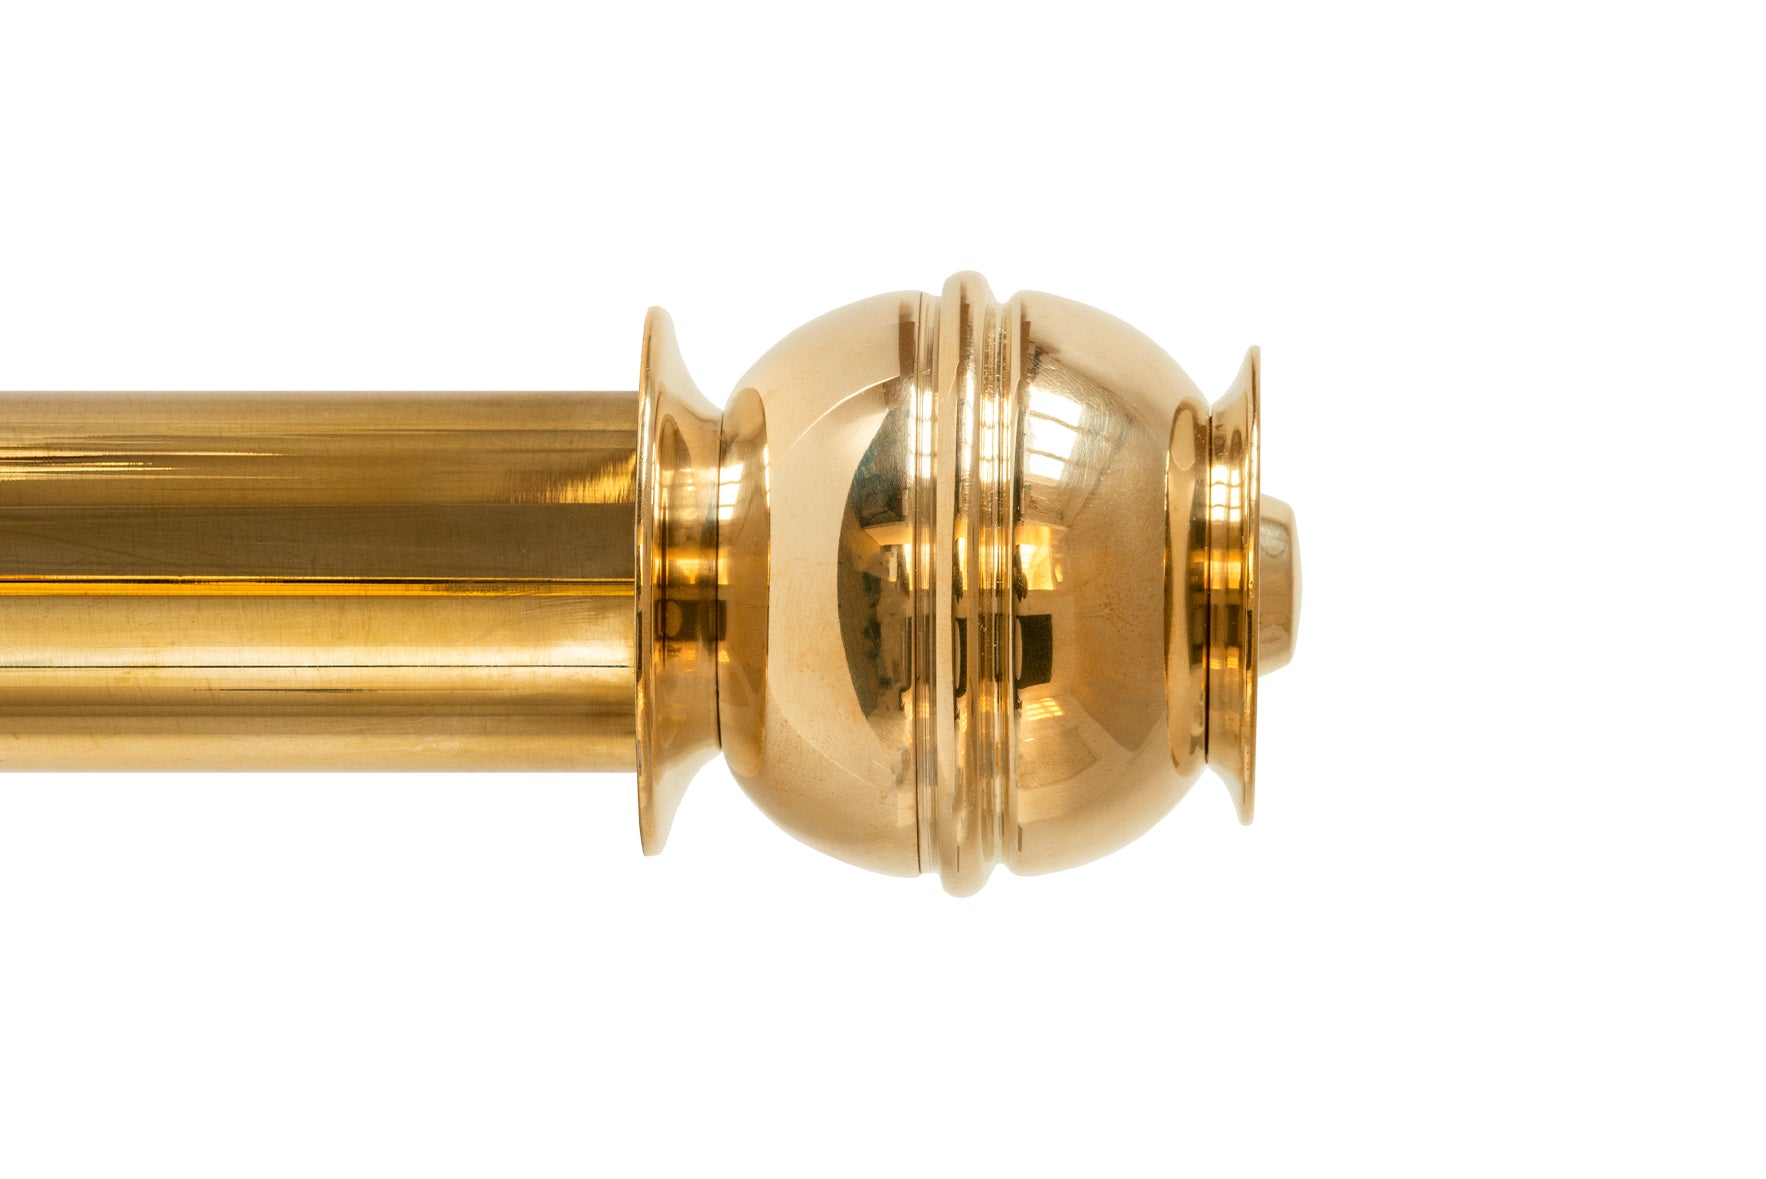 Tillys Classic Pomegranate Finial Curtain Pole Set in Polished Brass